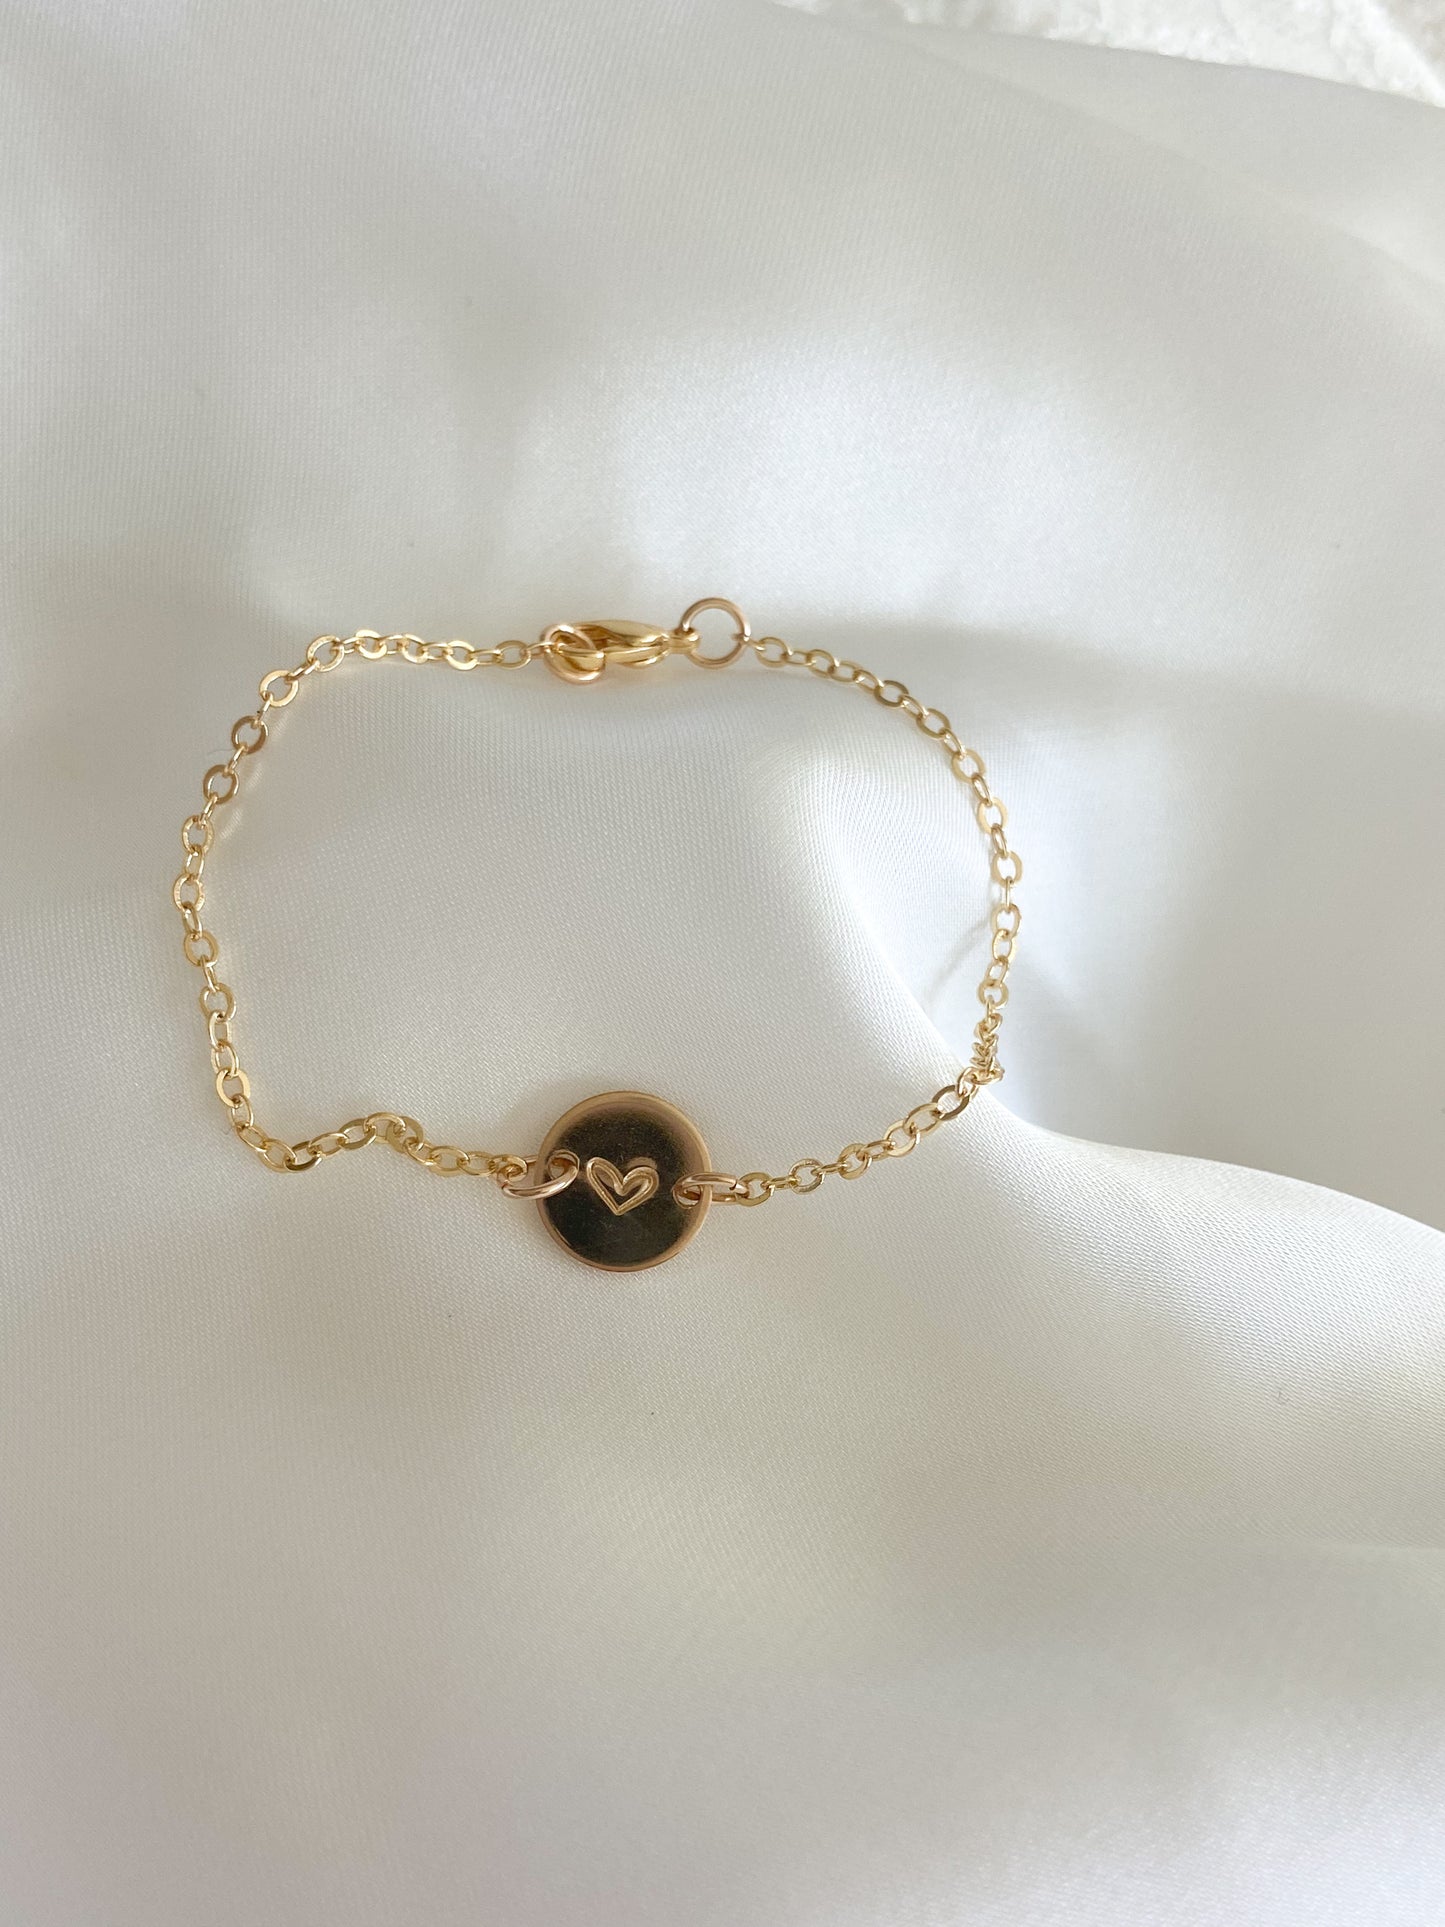 A gold necklace with a heart stamped on it, laying on a white background